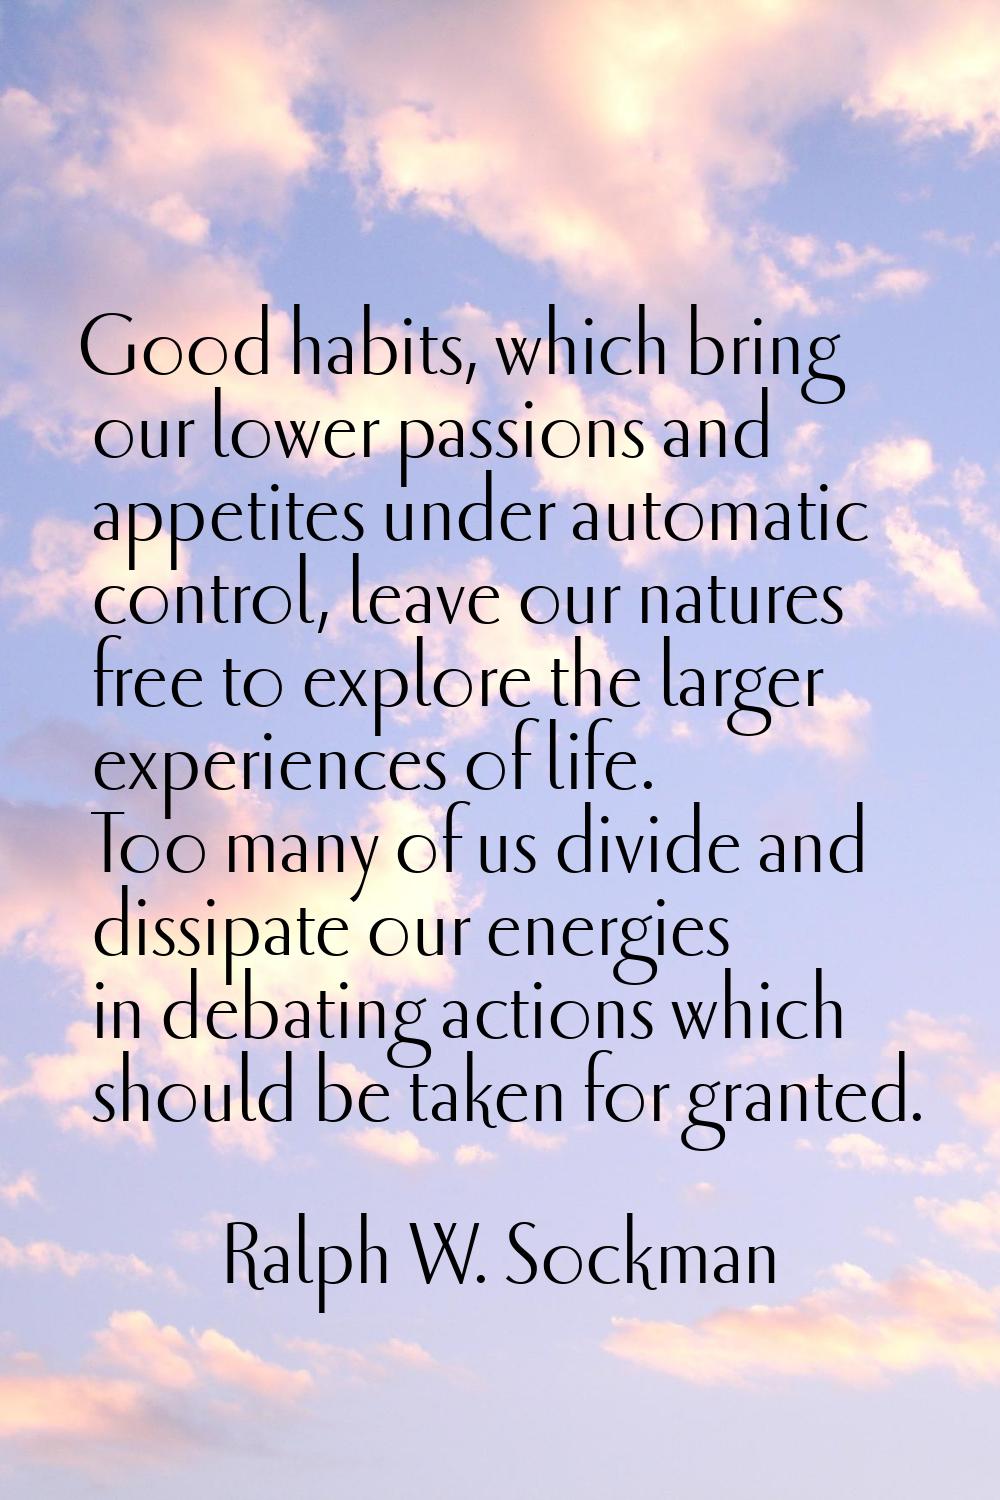 Good habits, which bring our lower passions and appetites under automatic control, leave our nature